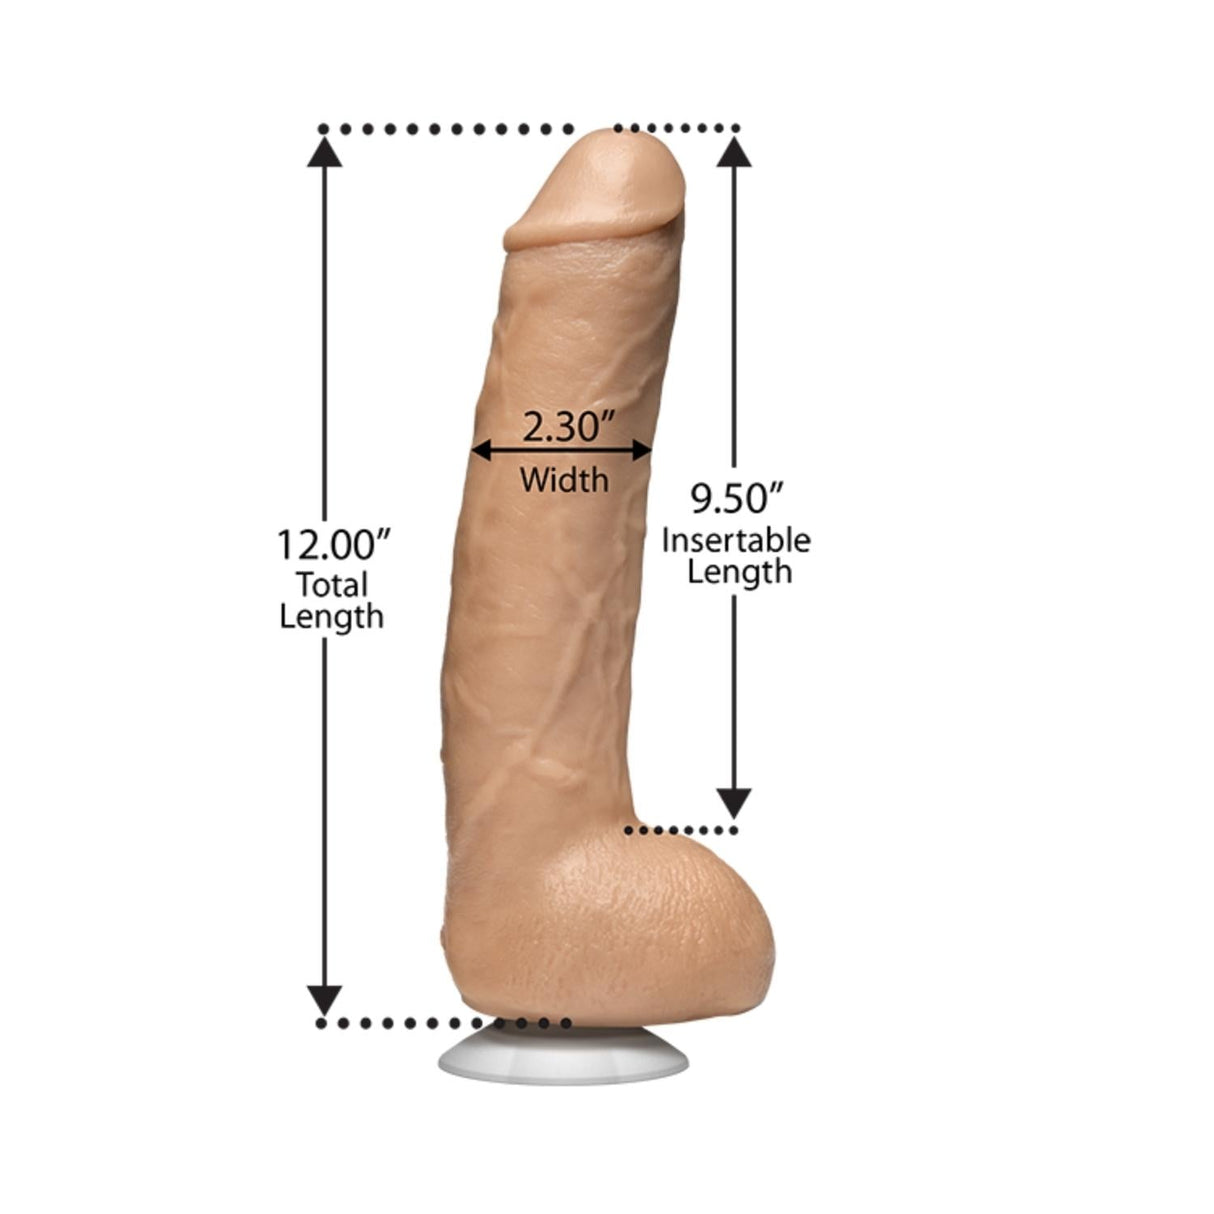 John Holmes Realistic Dildo With Removable Vac-U-Lock Suction Cup